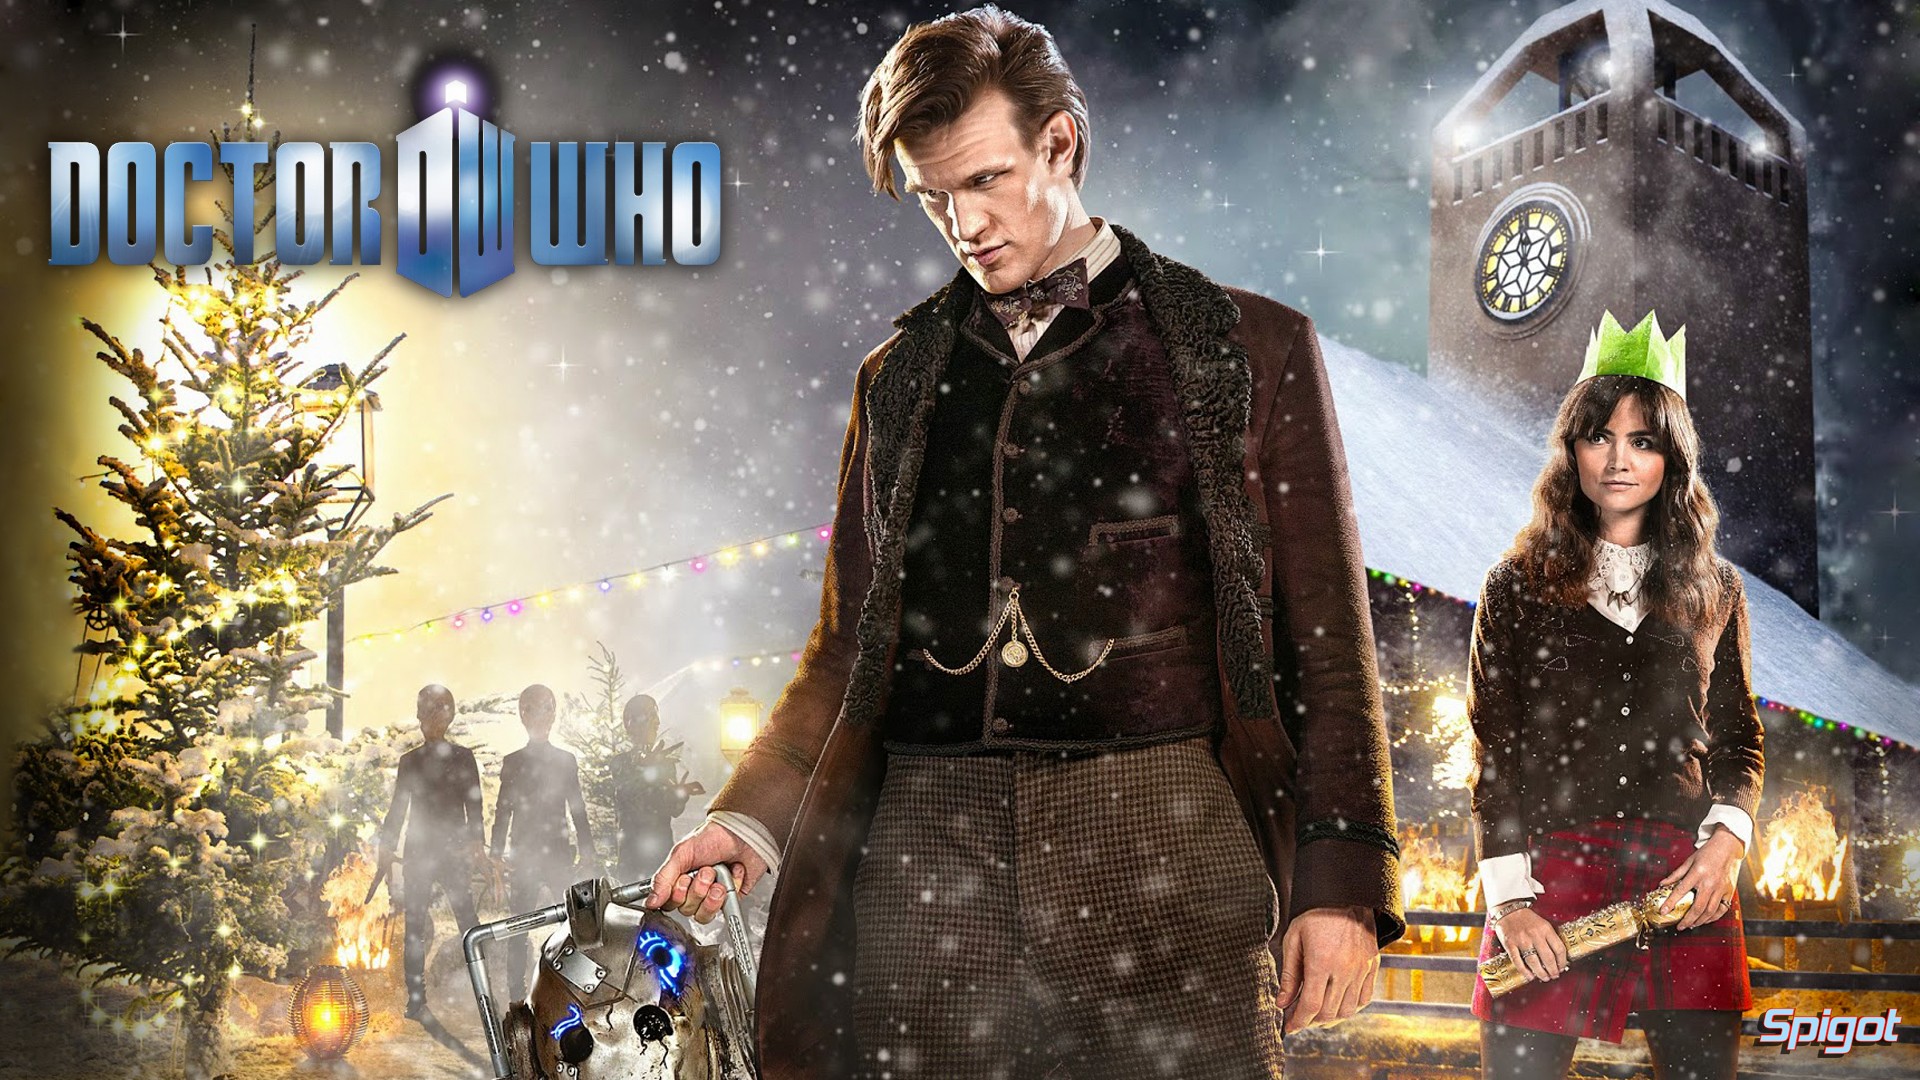 The Doctor, Doctor Who, Matt Smith, The Time Of The Doctor, Jenna Coleman, Clara Oswald, Eleventh Doctor Wallpaper